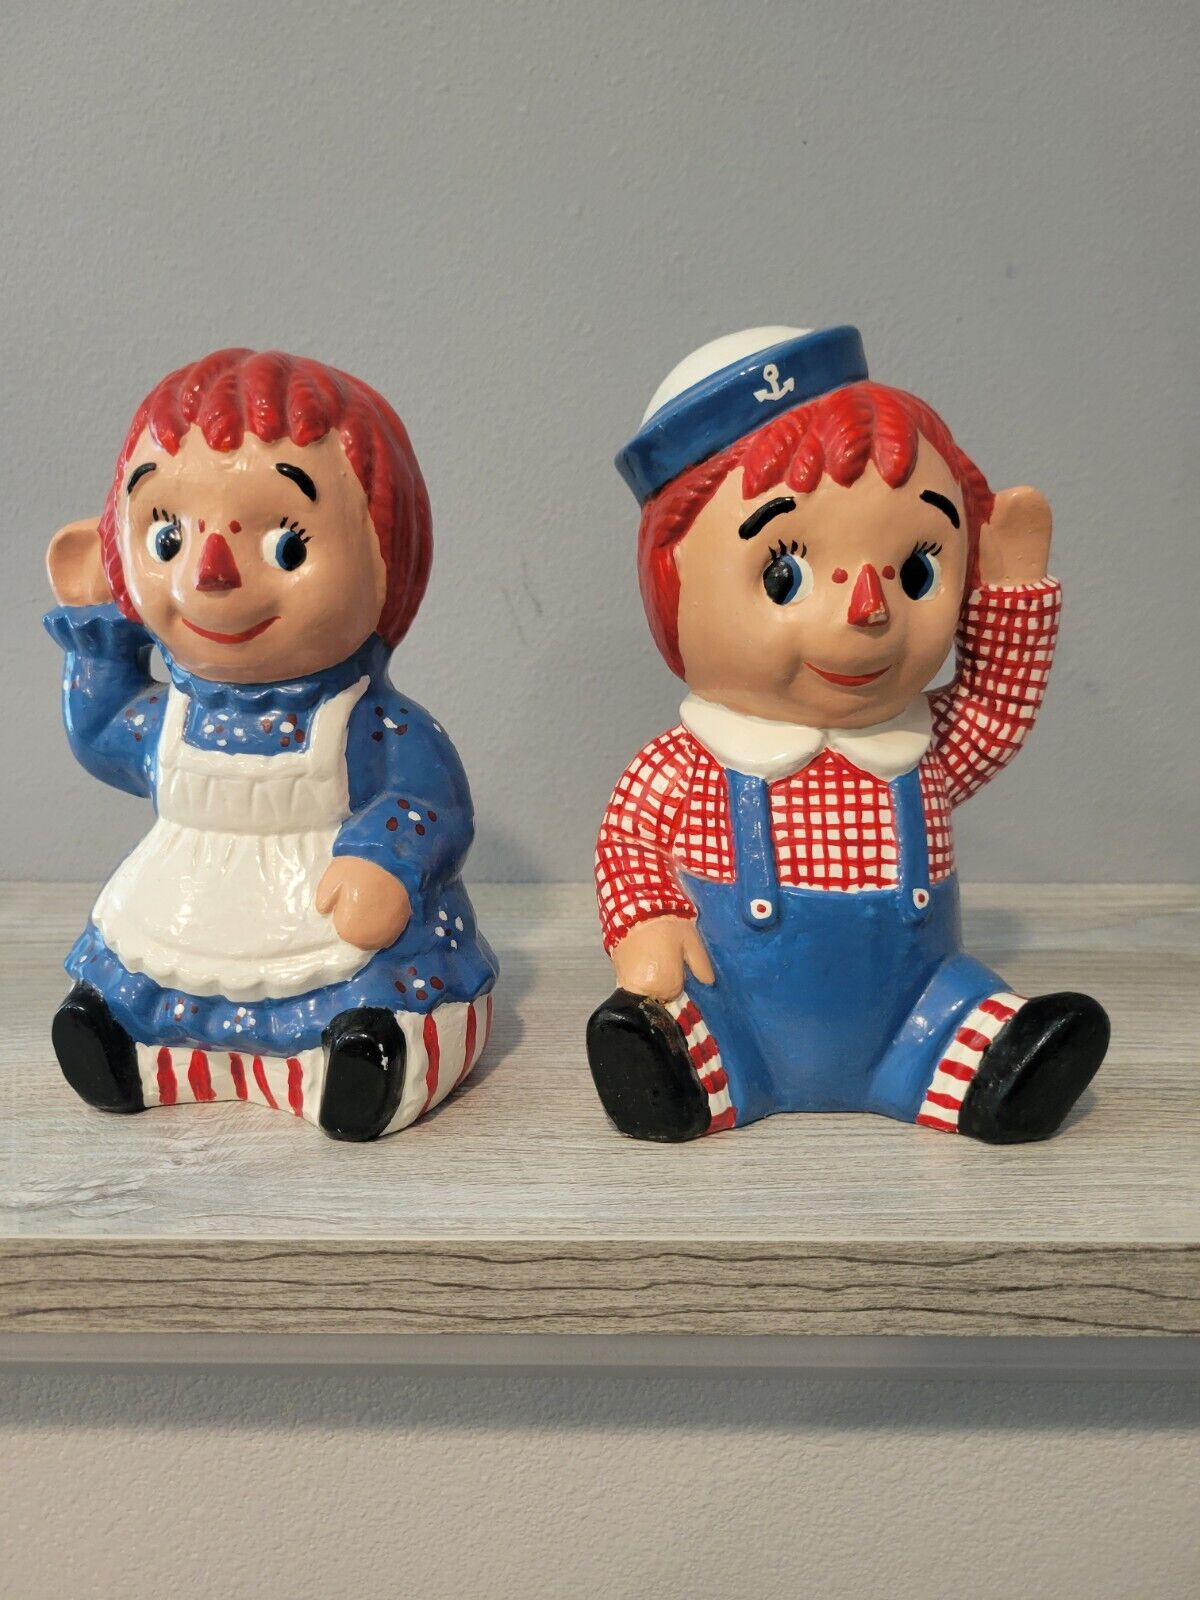 VINTAGE 1970s RAGGEDY ANNE & ANDY CERAMIC BANKS. GOOD CONDITION. 6.5 Inches Tall